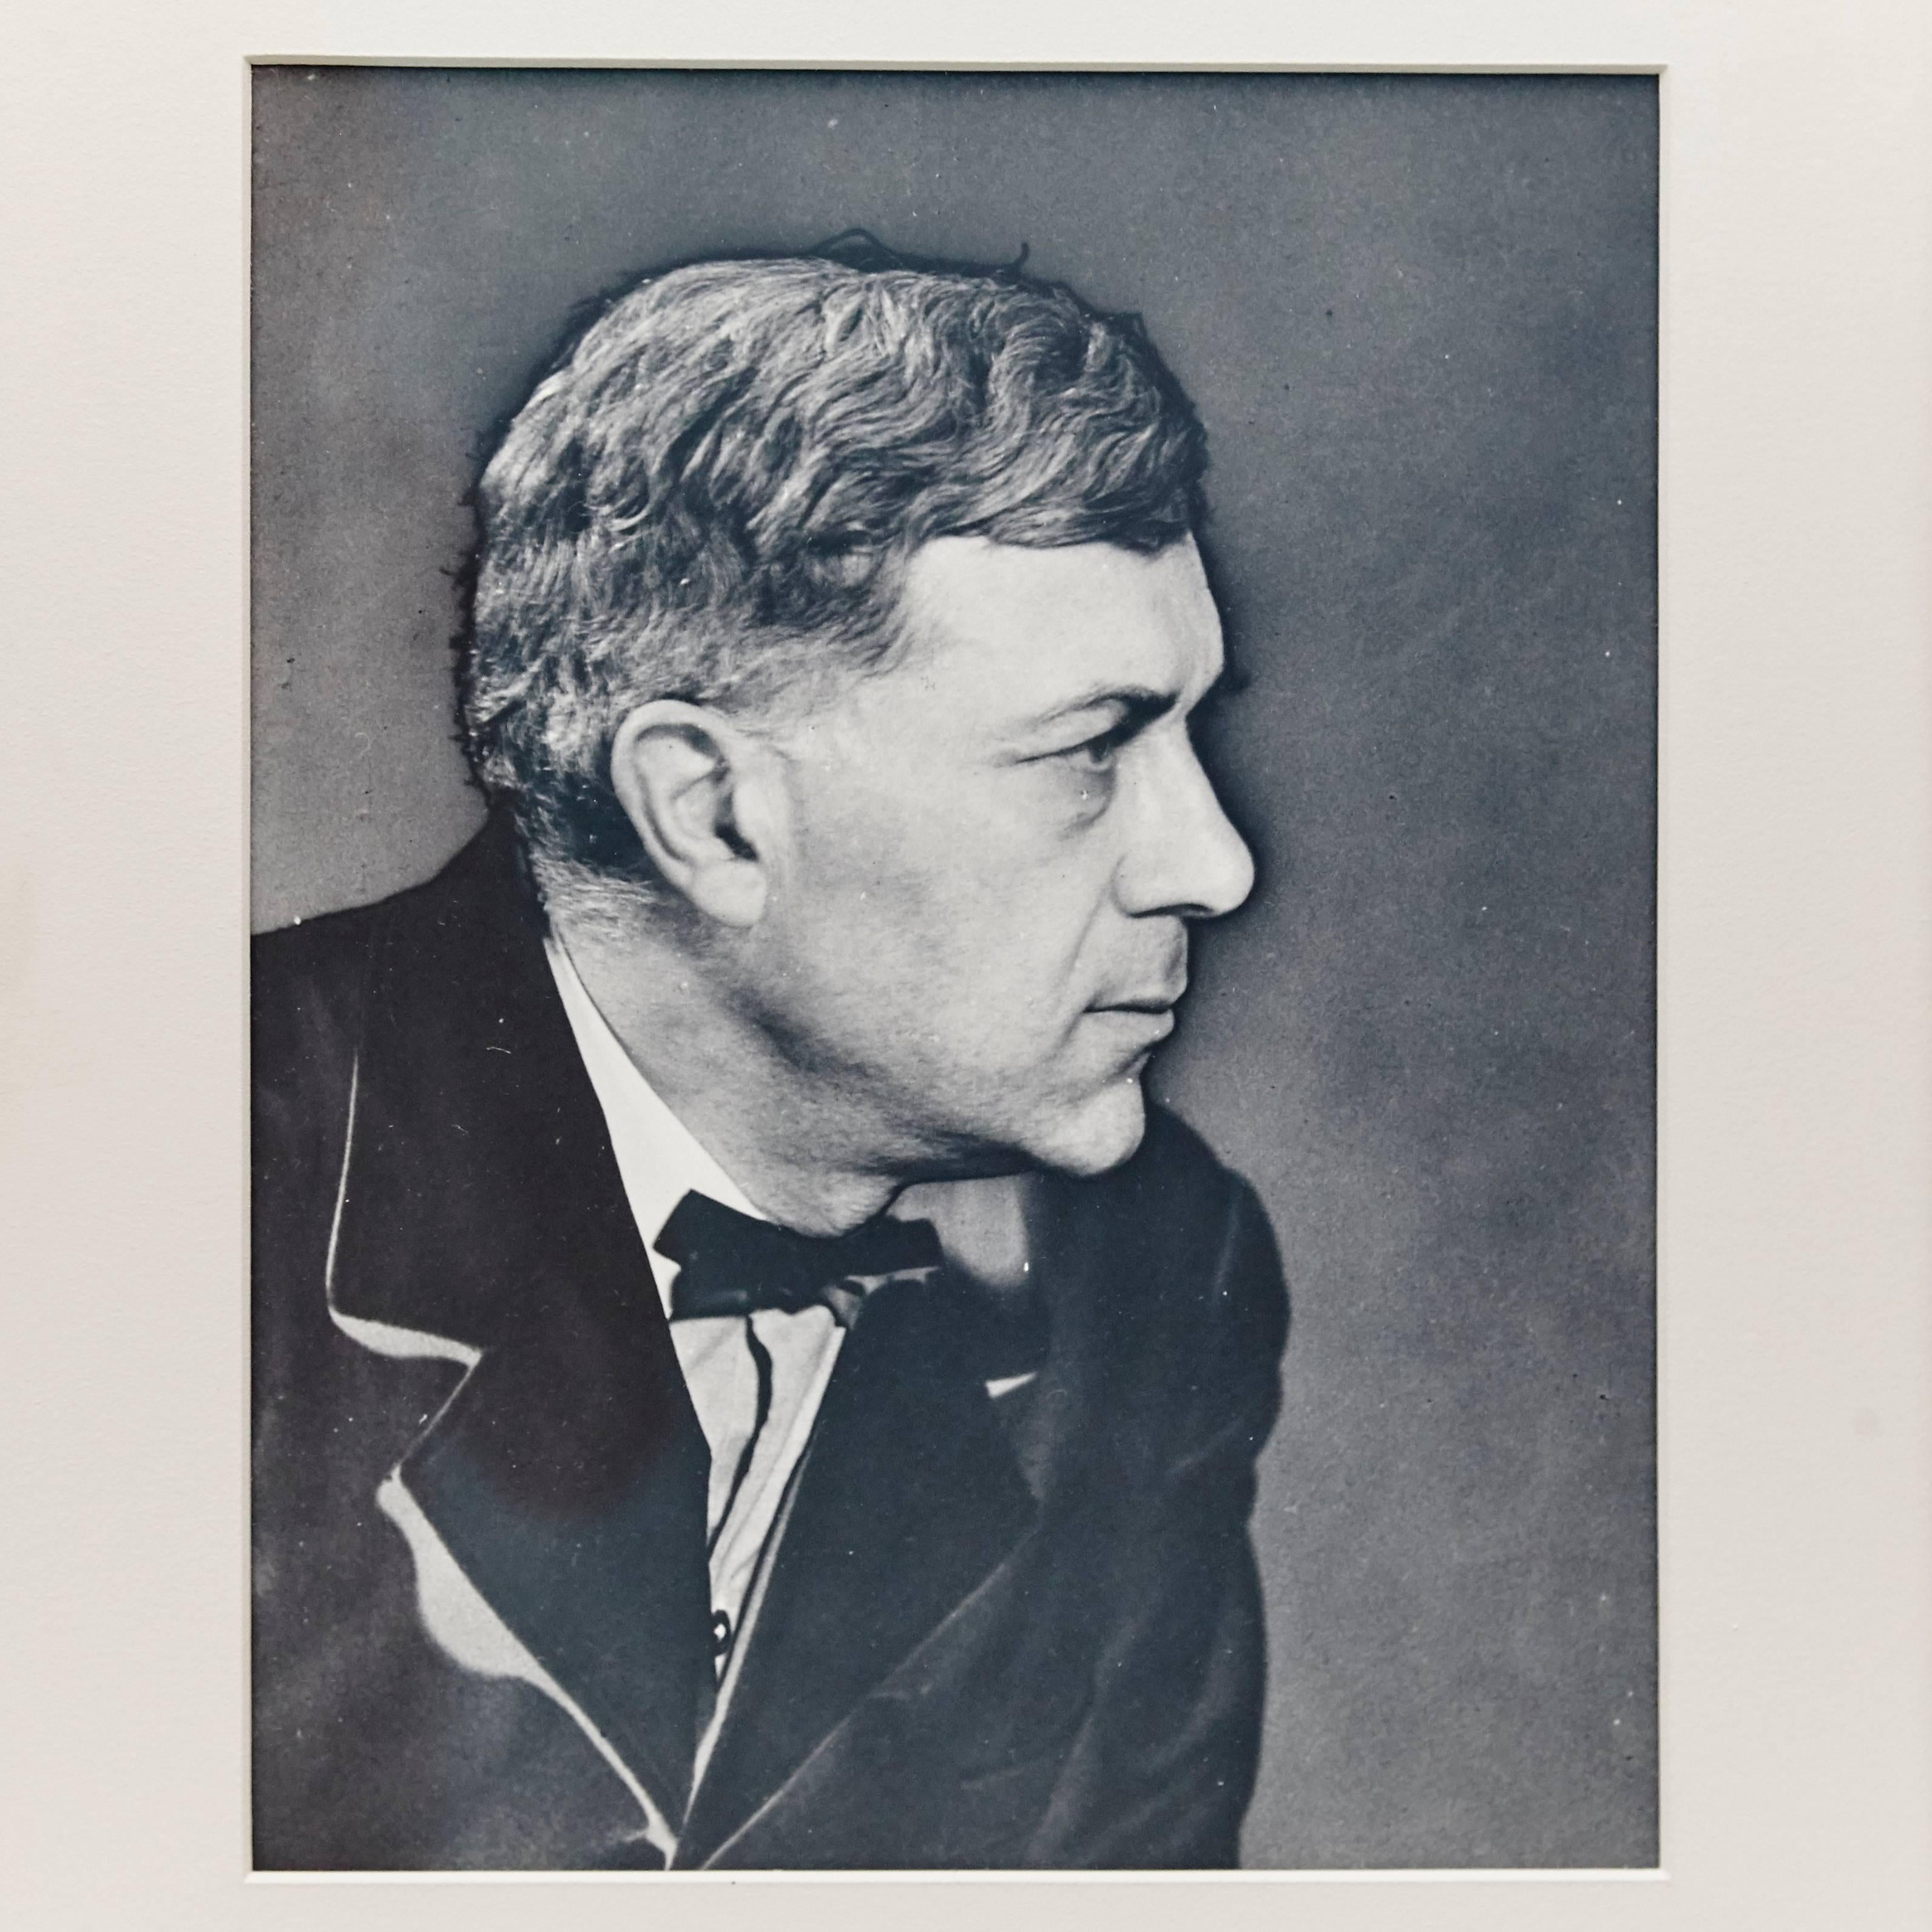 Man Ray Photograph of Georges Braque, 1930.

A posthumous print from the original negative in 1977 by Pierre Gassmann.

Gelatin silver bromide, framed on a 19th century frame with museum glass.

(Man Ray 1890–1976) was an American visual